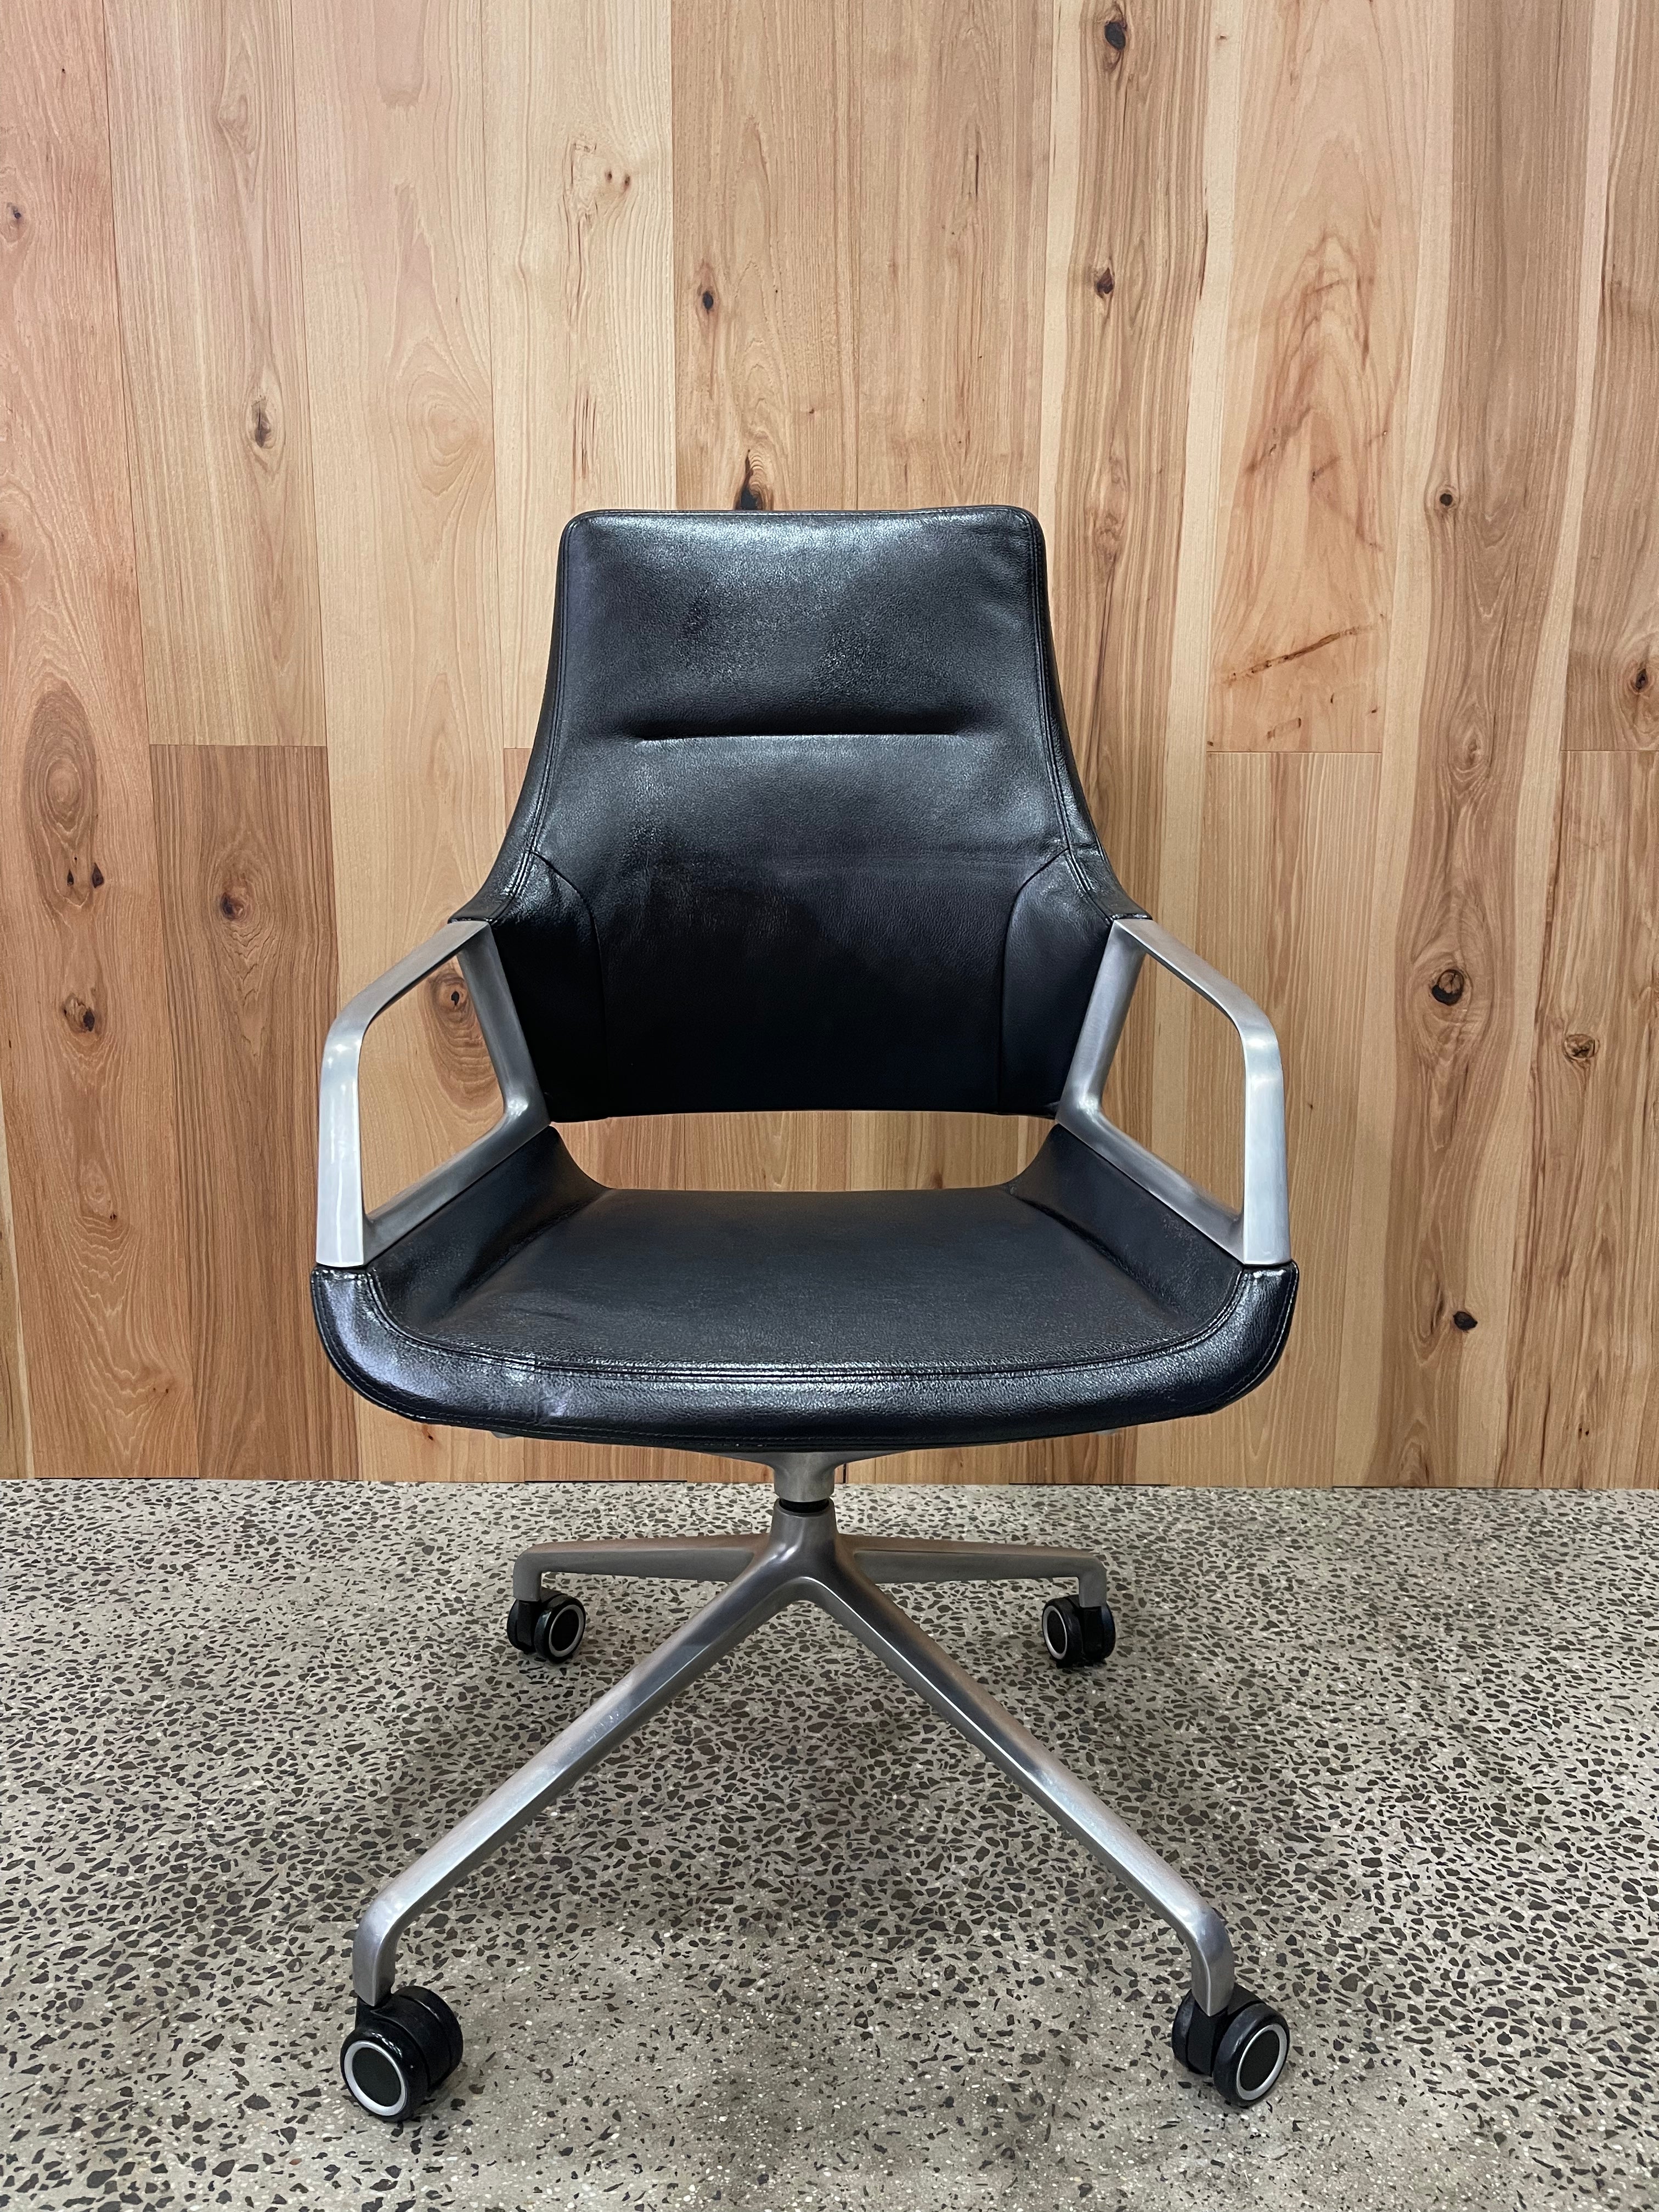 Wilkhahn Graph Chair Made in Germany Genuine Executive Management w/ Caster Wheels